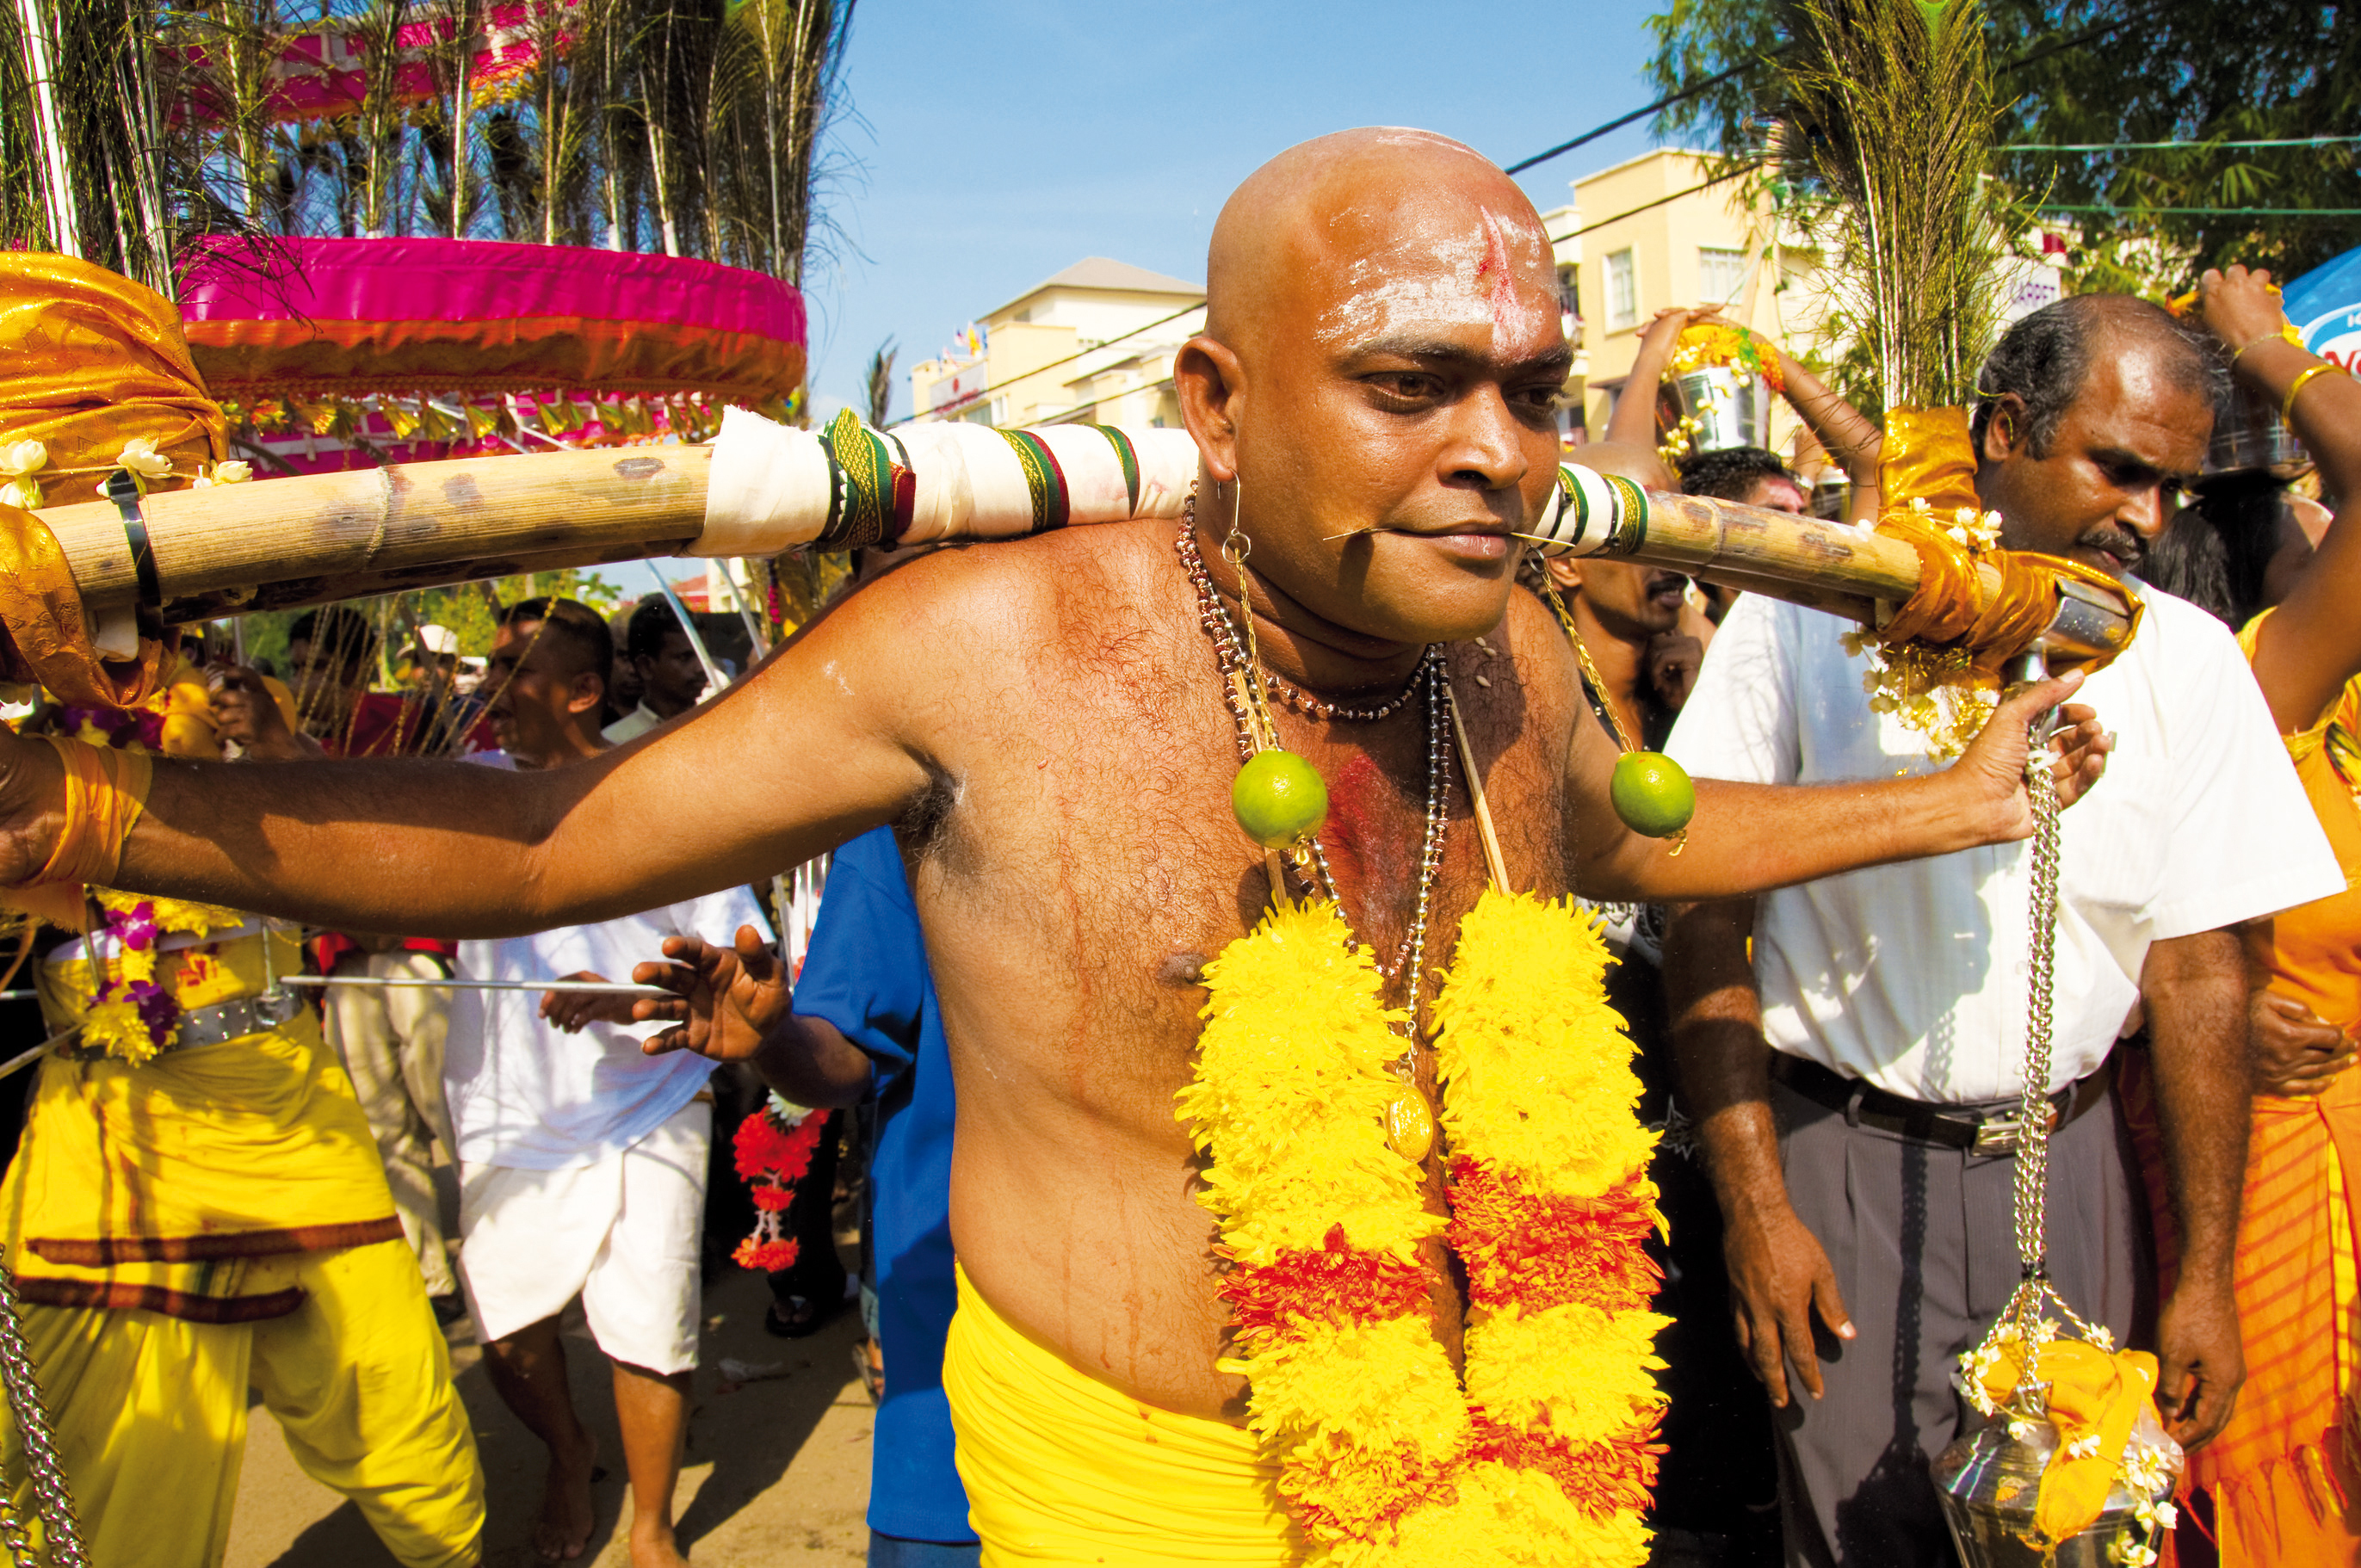 The insider's guide to Thaipusam